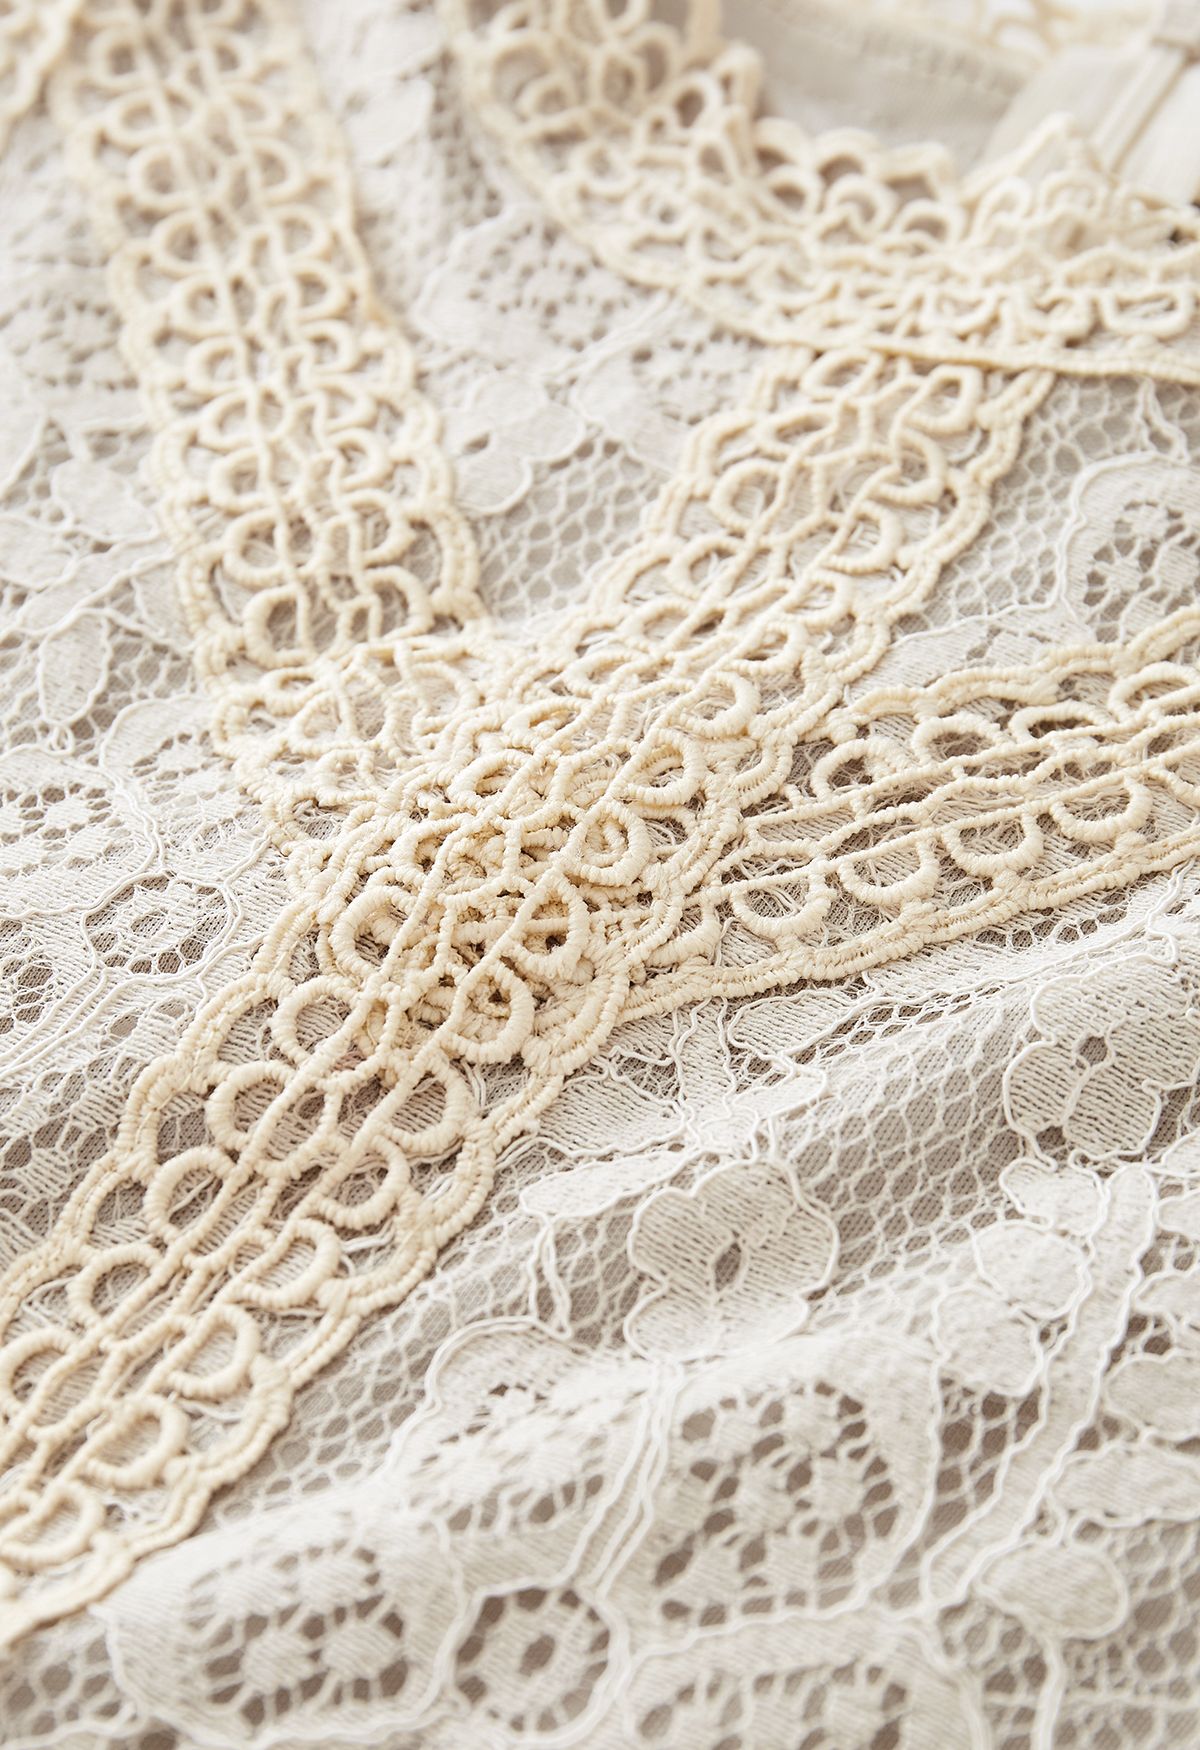 Your Sassy Start Long Sleeve Crochet Lace Top in Cream